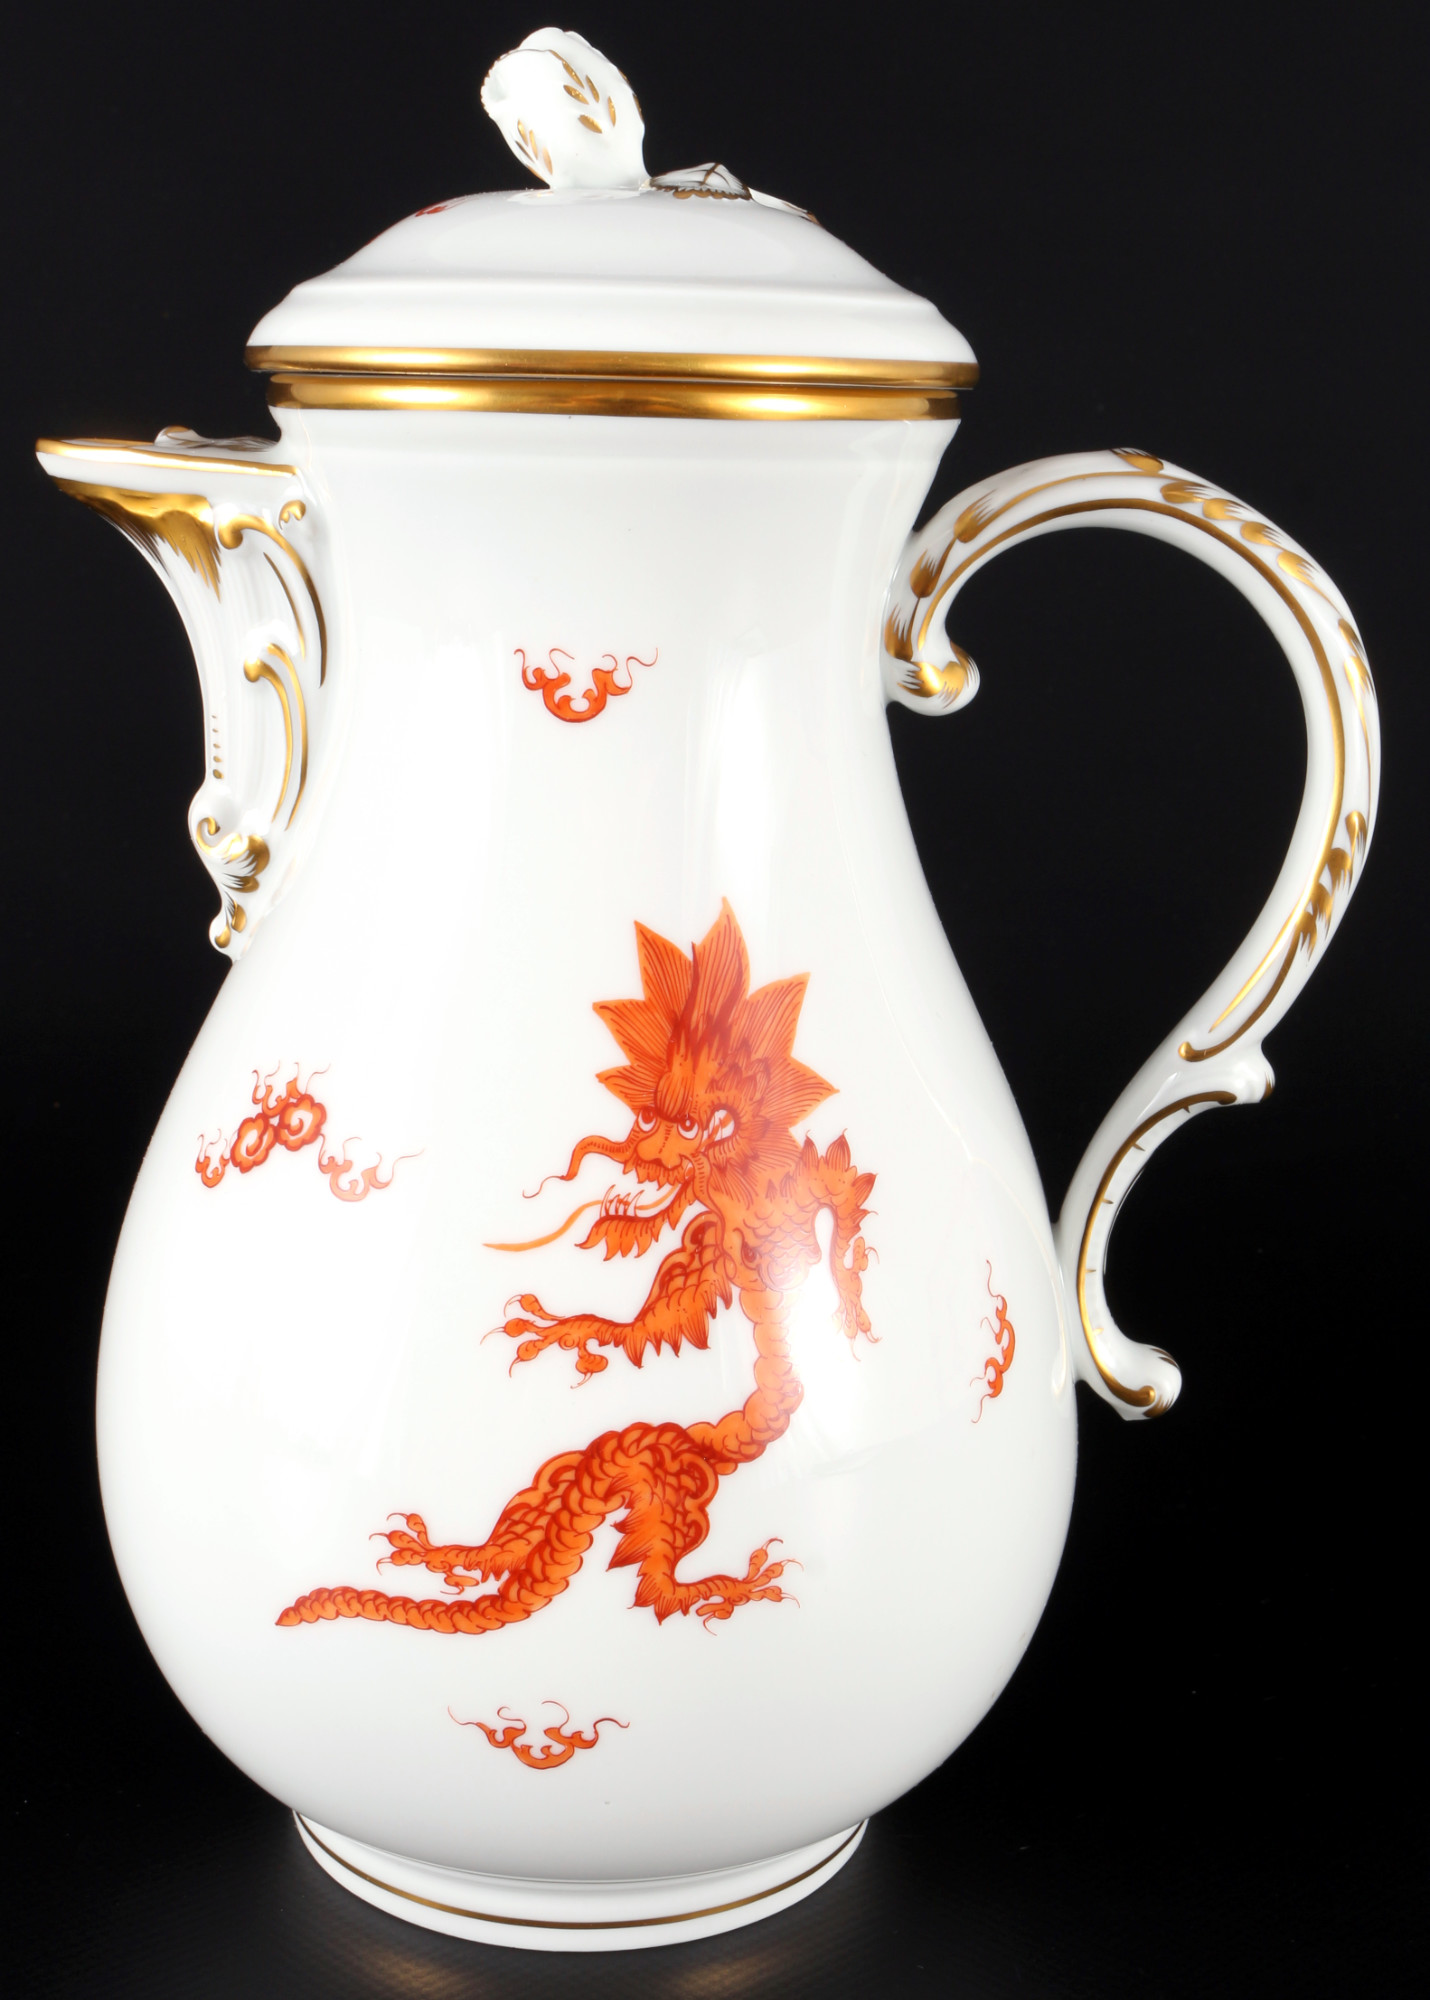 Meissen Red Ming Dragon coffee service for 8 pers. 1st choice, Mingdrache Kaffeeservice für 8 Person - Image 3 of 6